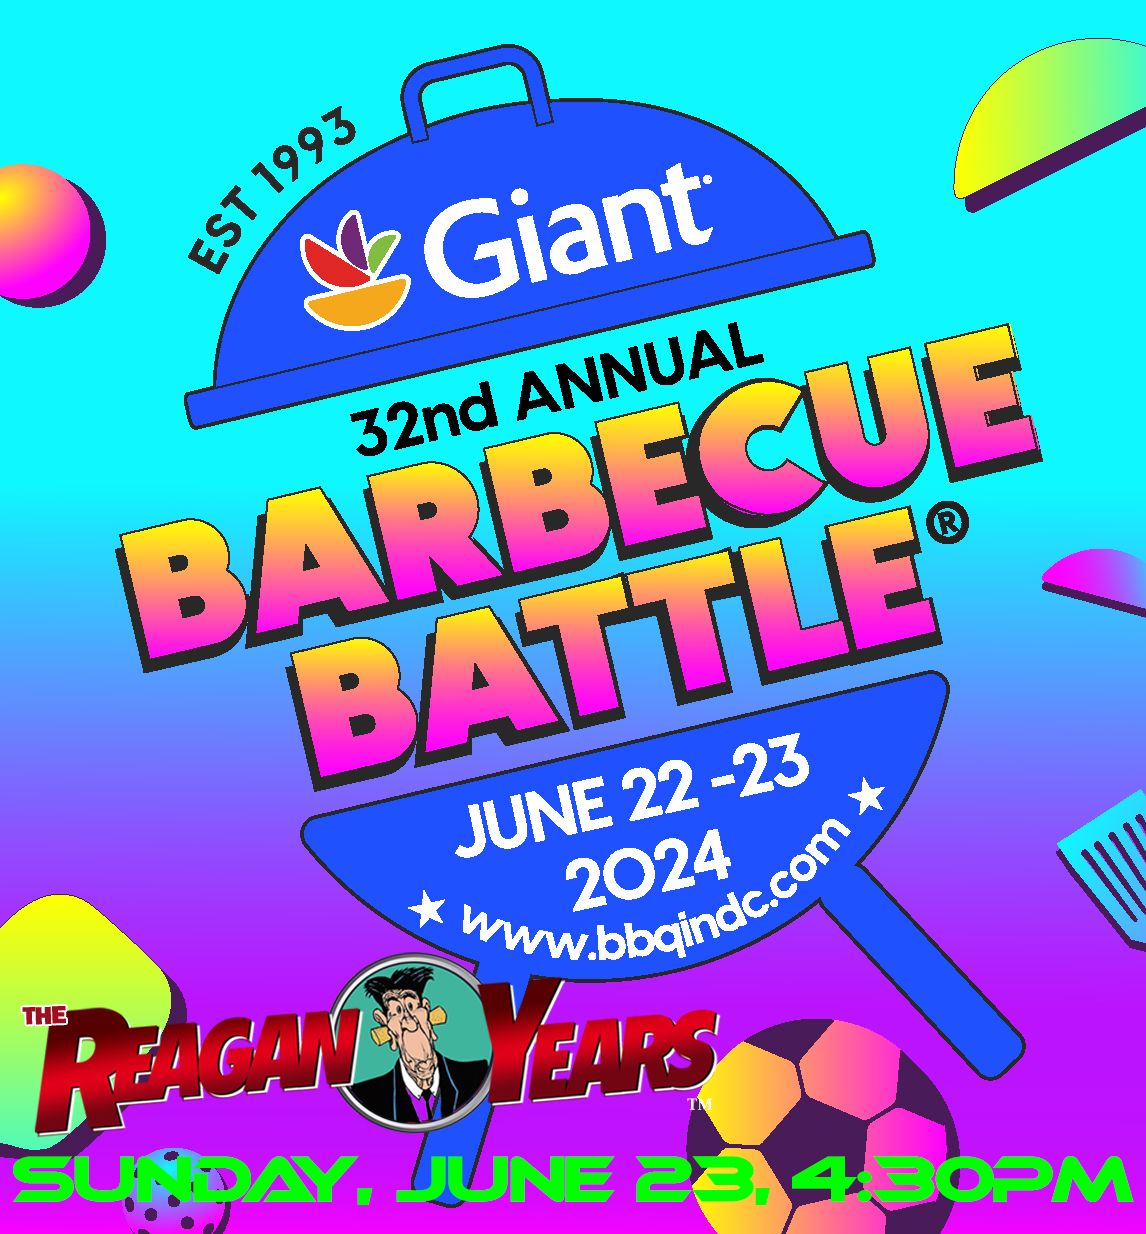 Giant's 32nd Annual Barbeque Battle Washington DC with The Reagan Years